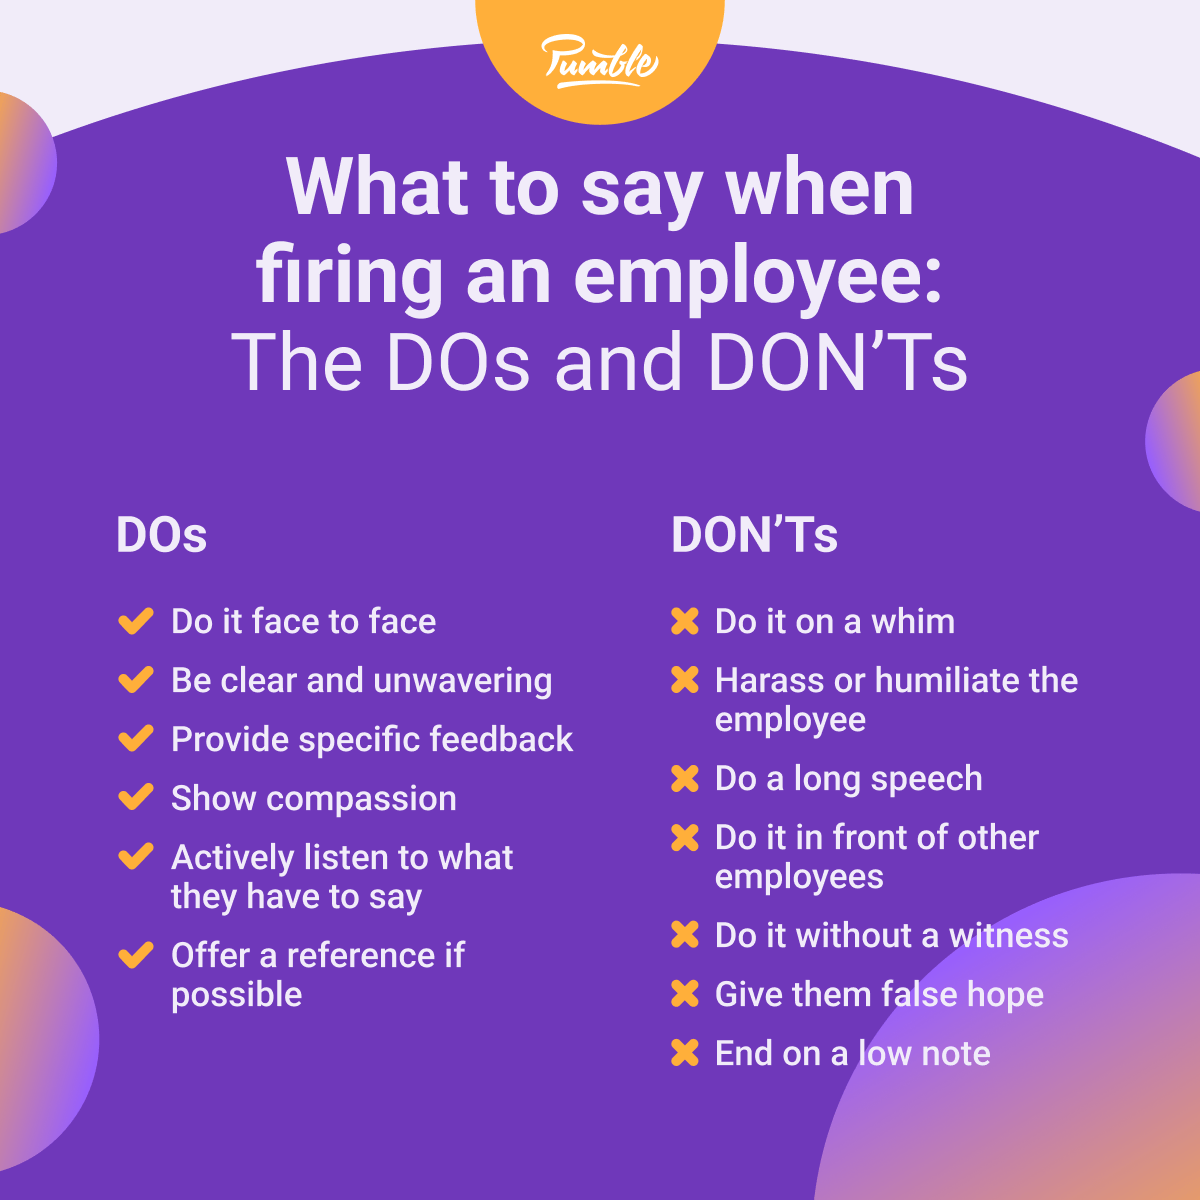 What to say when firing an employee_ The DOs and DON’Ts